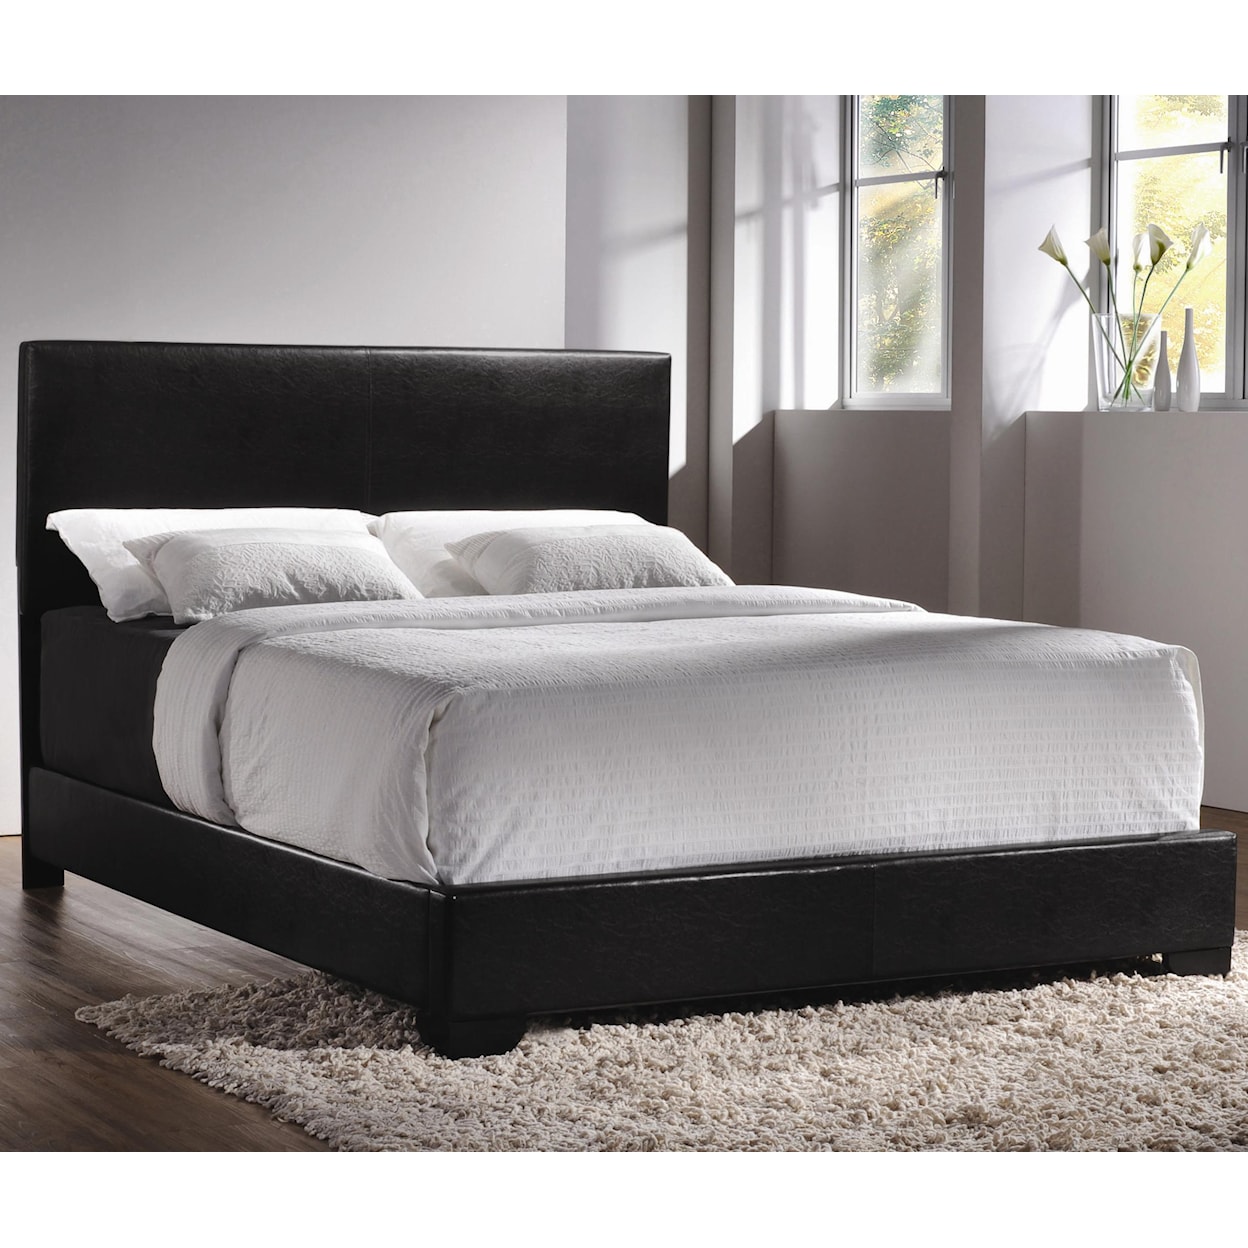 Michael Alan CSR Select Upholstered Beds California King Upholstered Low-Profile Bed